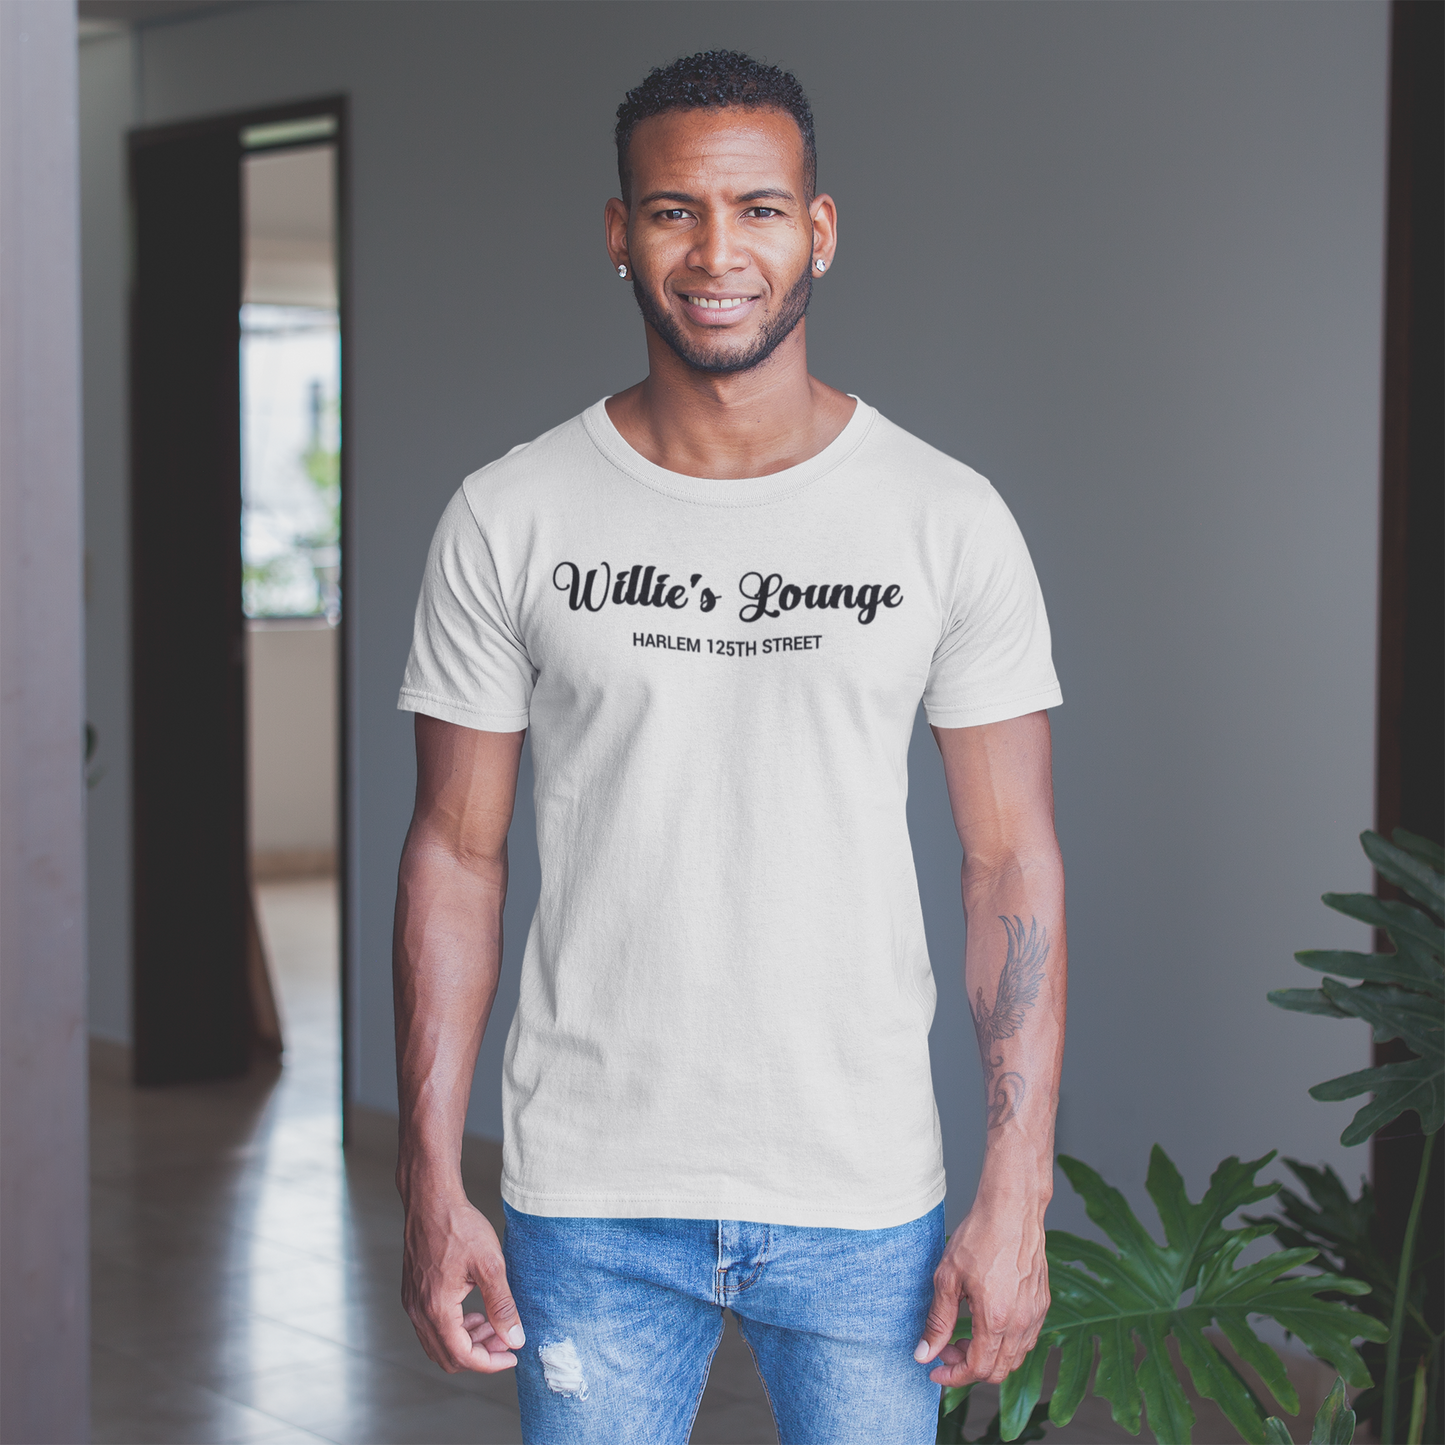 Willie’s Lounge T-Shirt